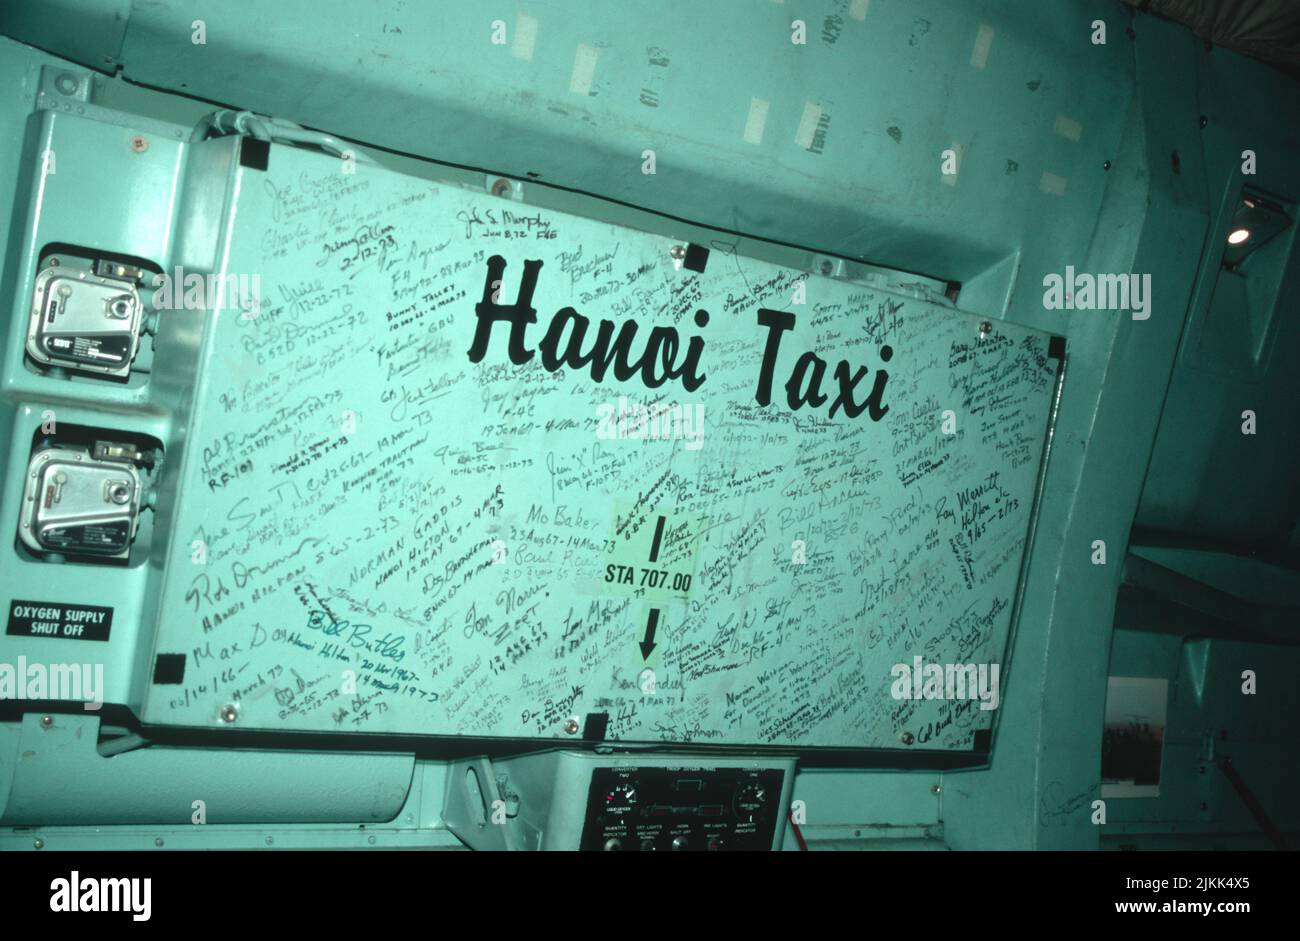 Signature Panel on the Hanoi Taxi, which was  on display at MCAS Miramar in San Diego, California Stock Photo